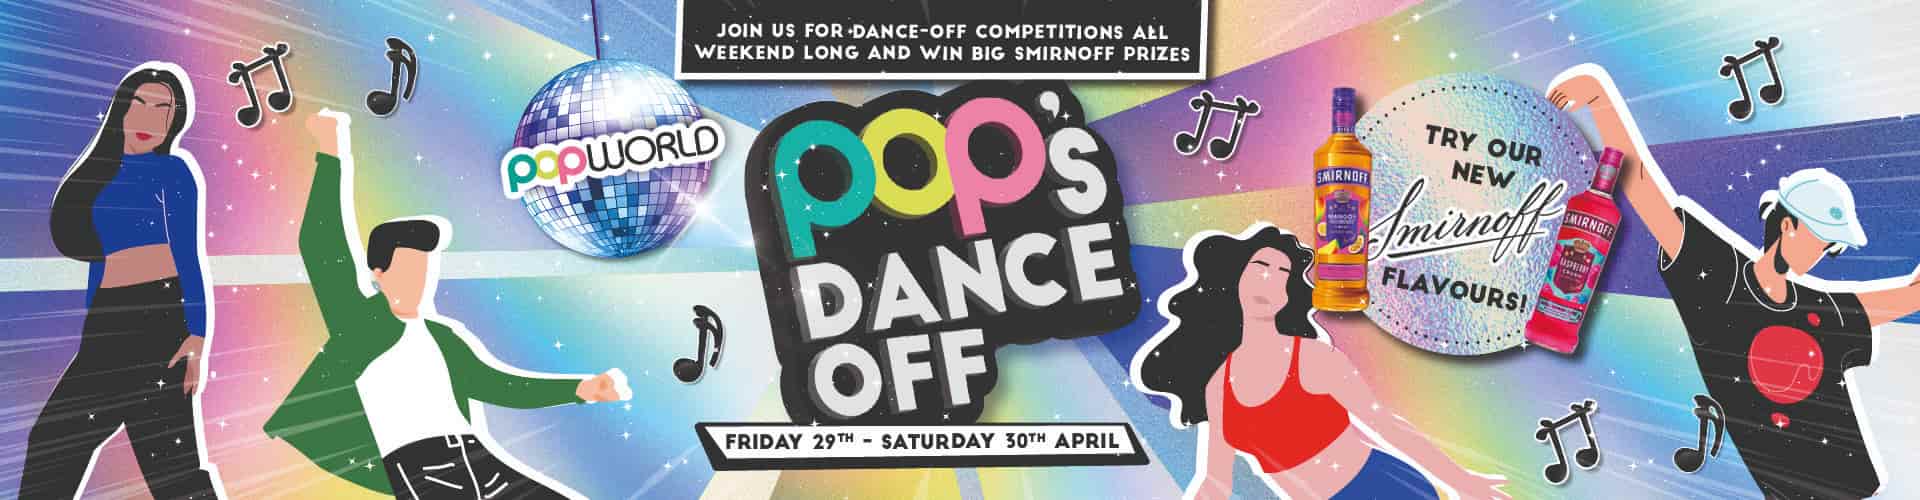 Pop's Dance Off - May Bank Holiday